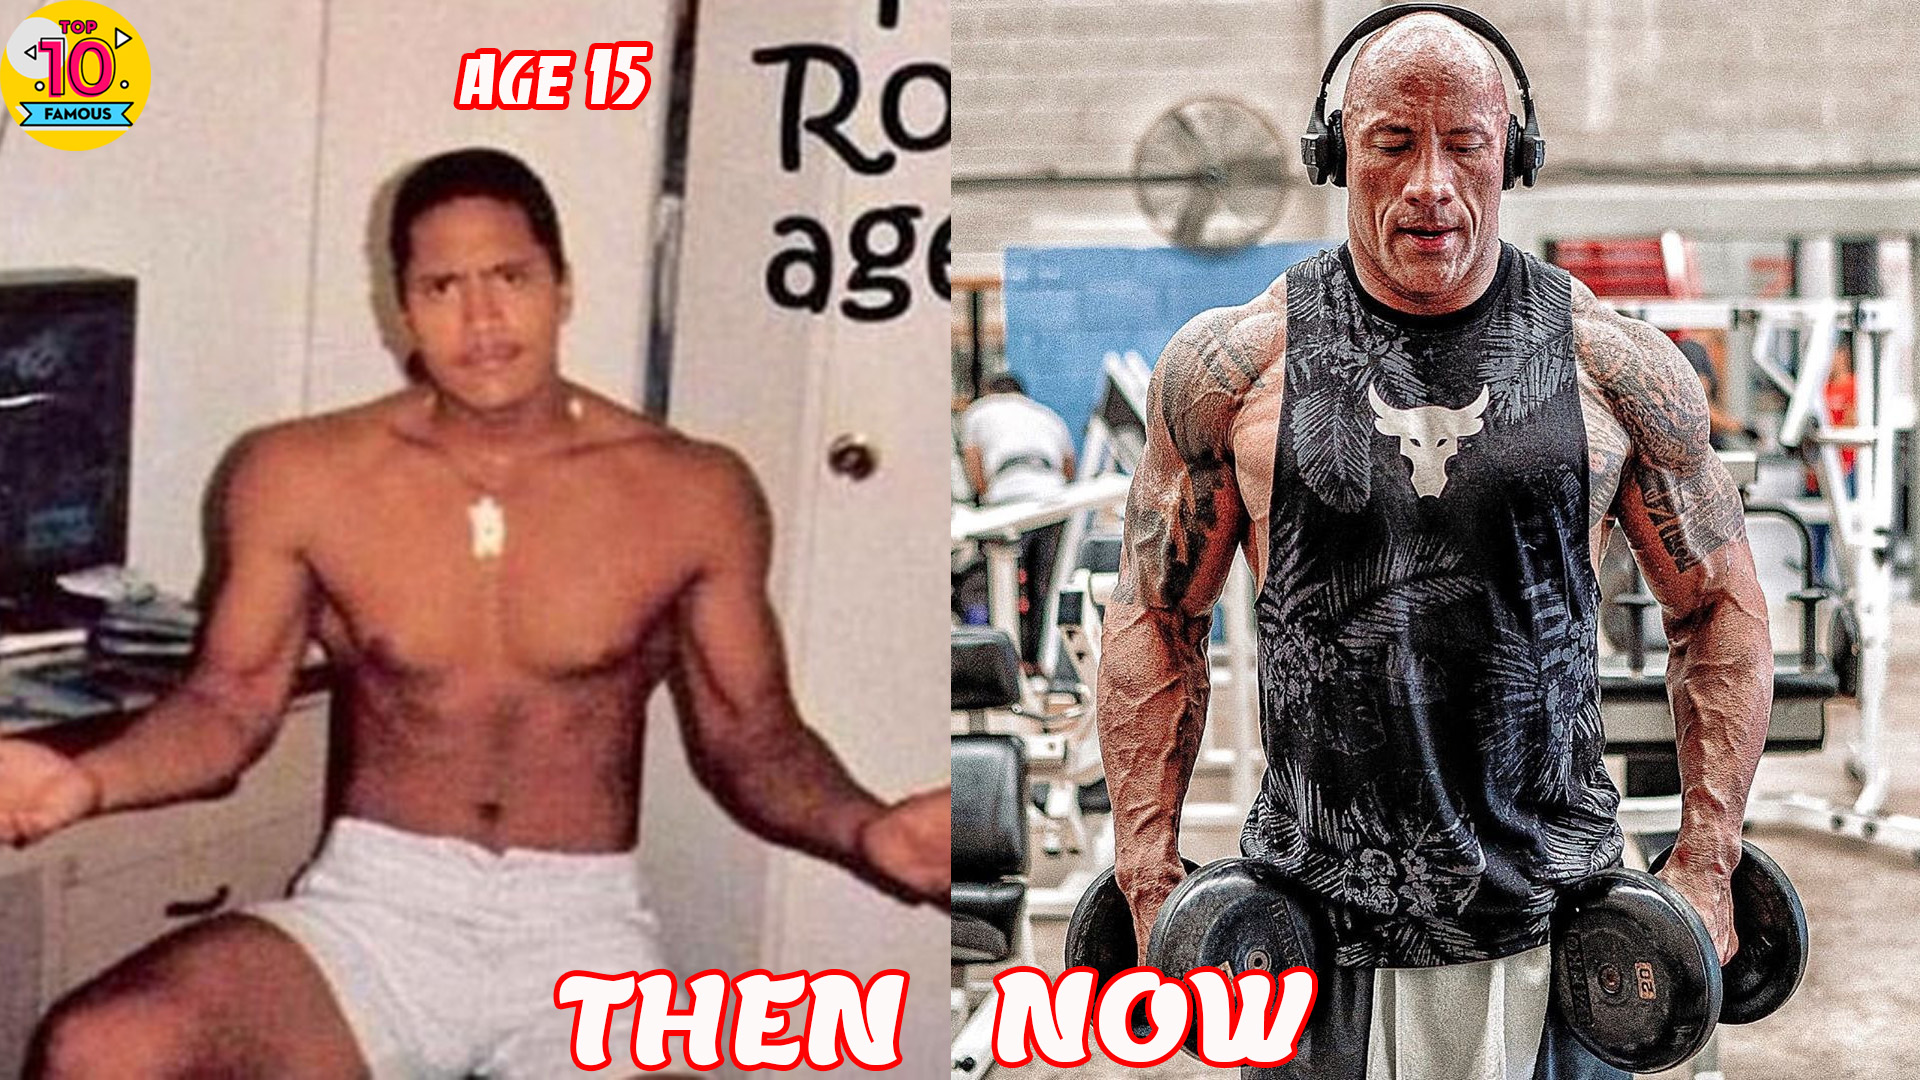 Dwayne Johnson - The Rock then and now - Lifestyle